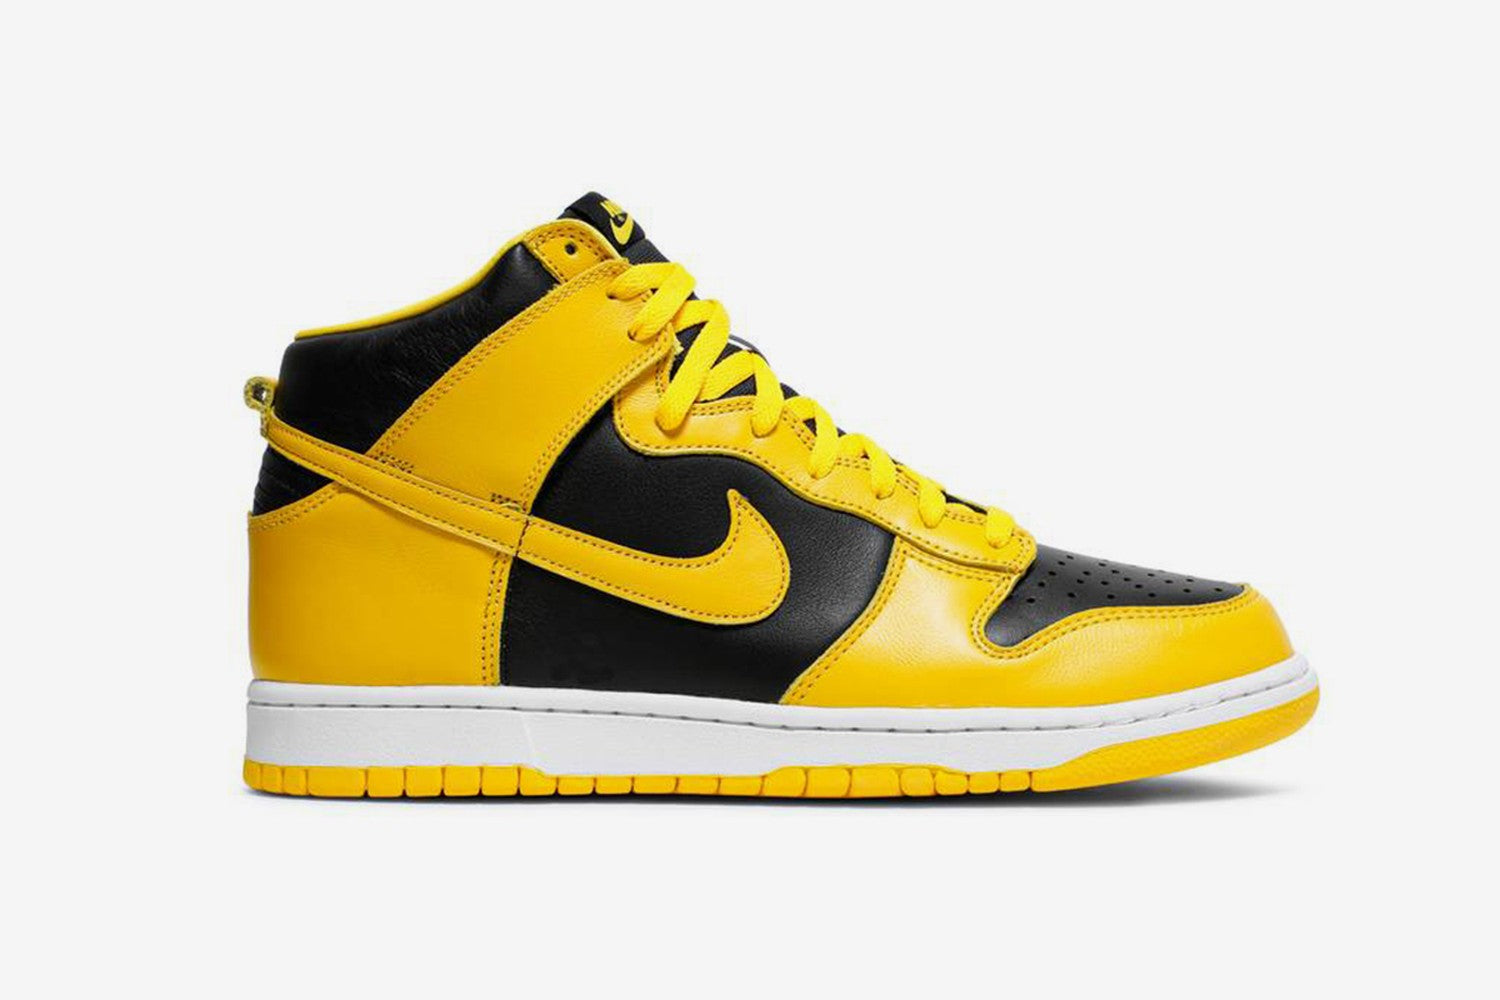 THE BEST NIKE DUNKS TO COP FOR UNDER $200